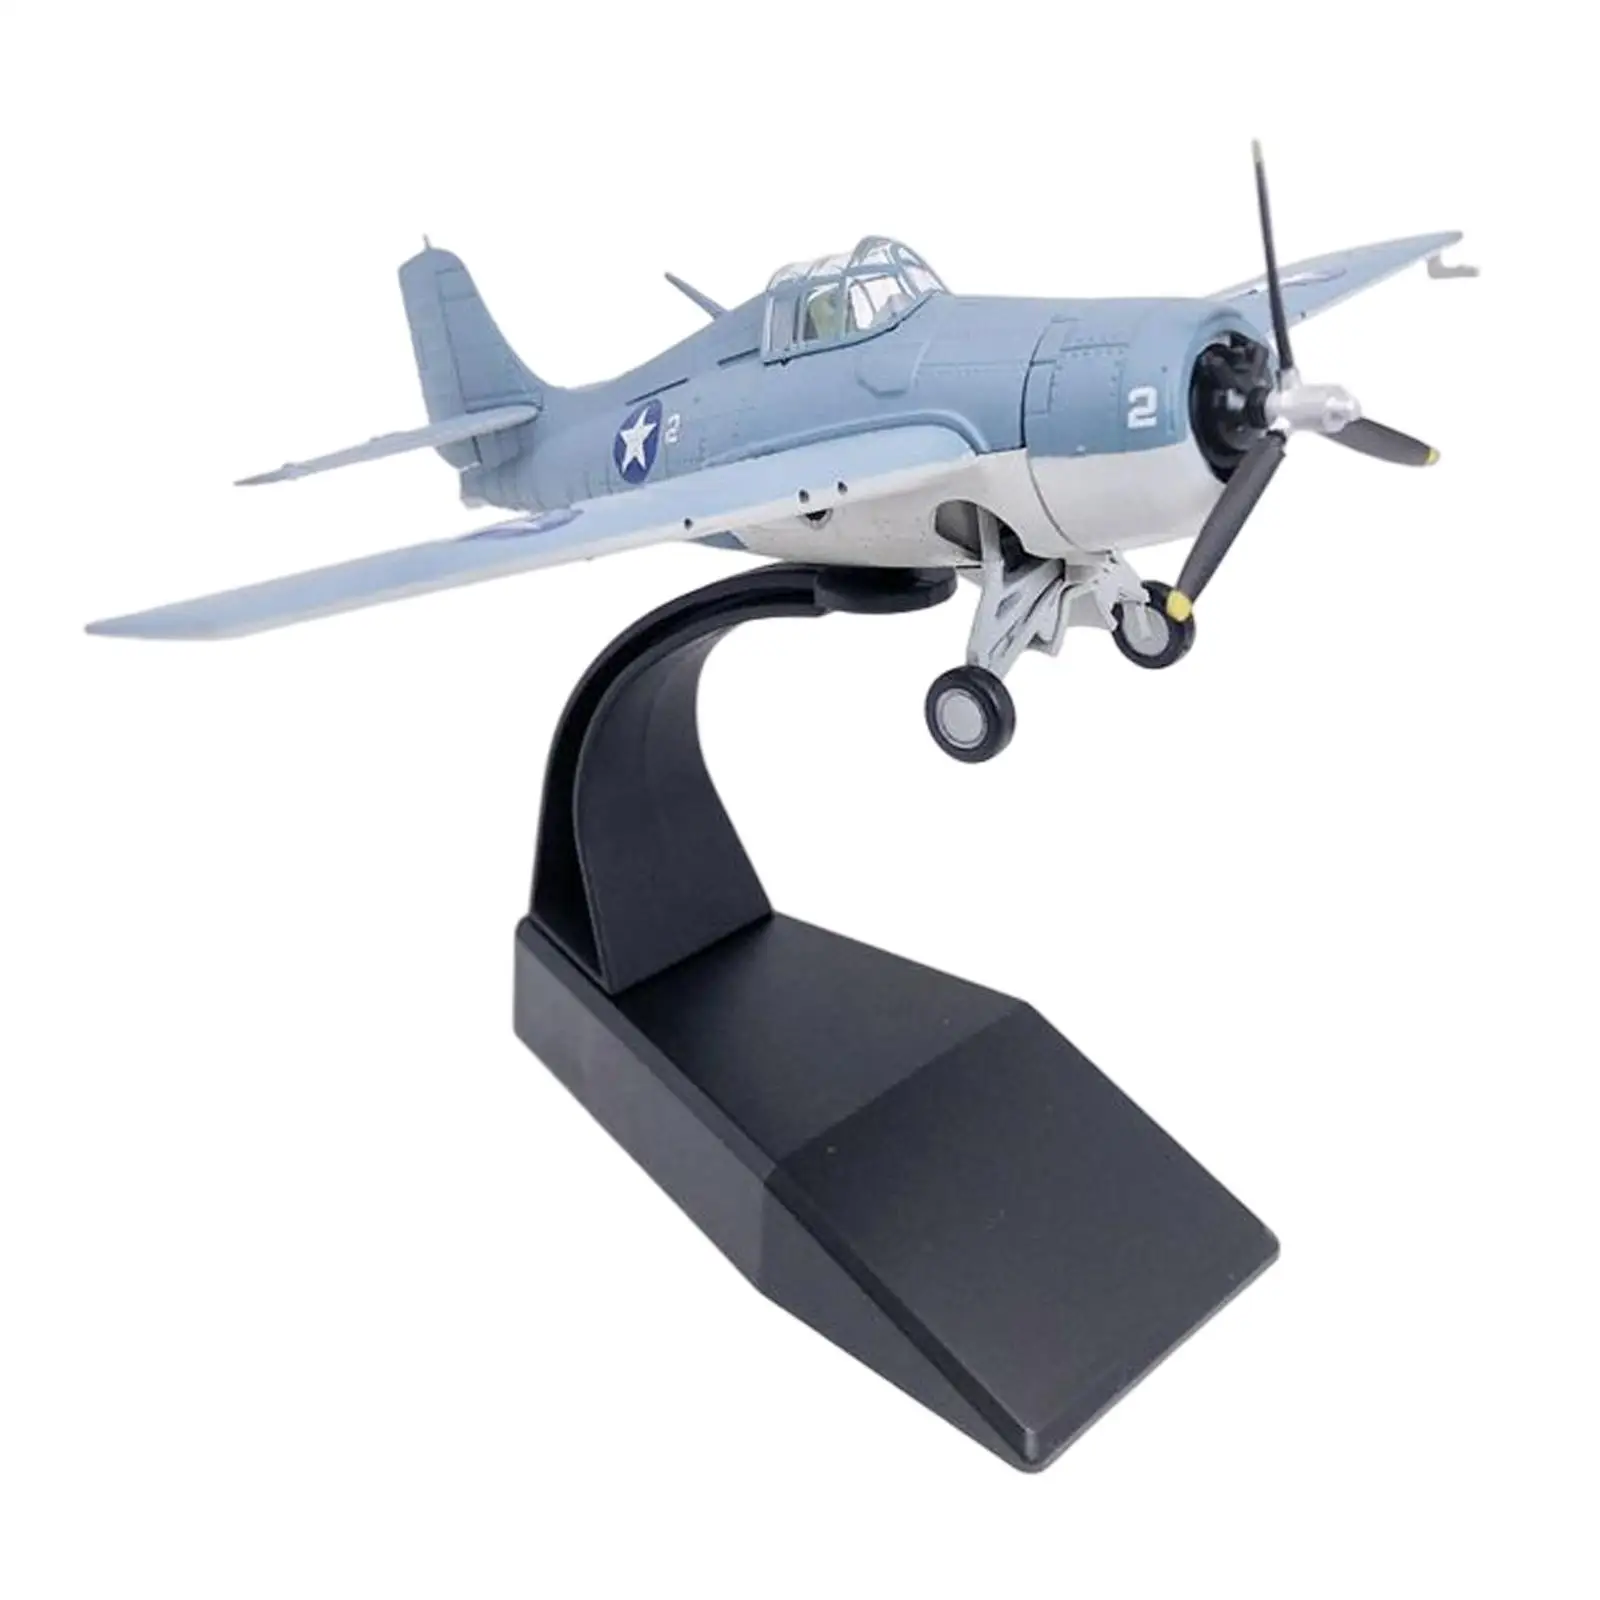 US  Plane Model 1:72 Scale 3D Alloy Simulation Ornament Fighter Model Toy for Living Room Home Table Decor Accessory